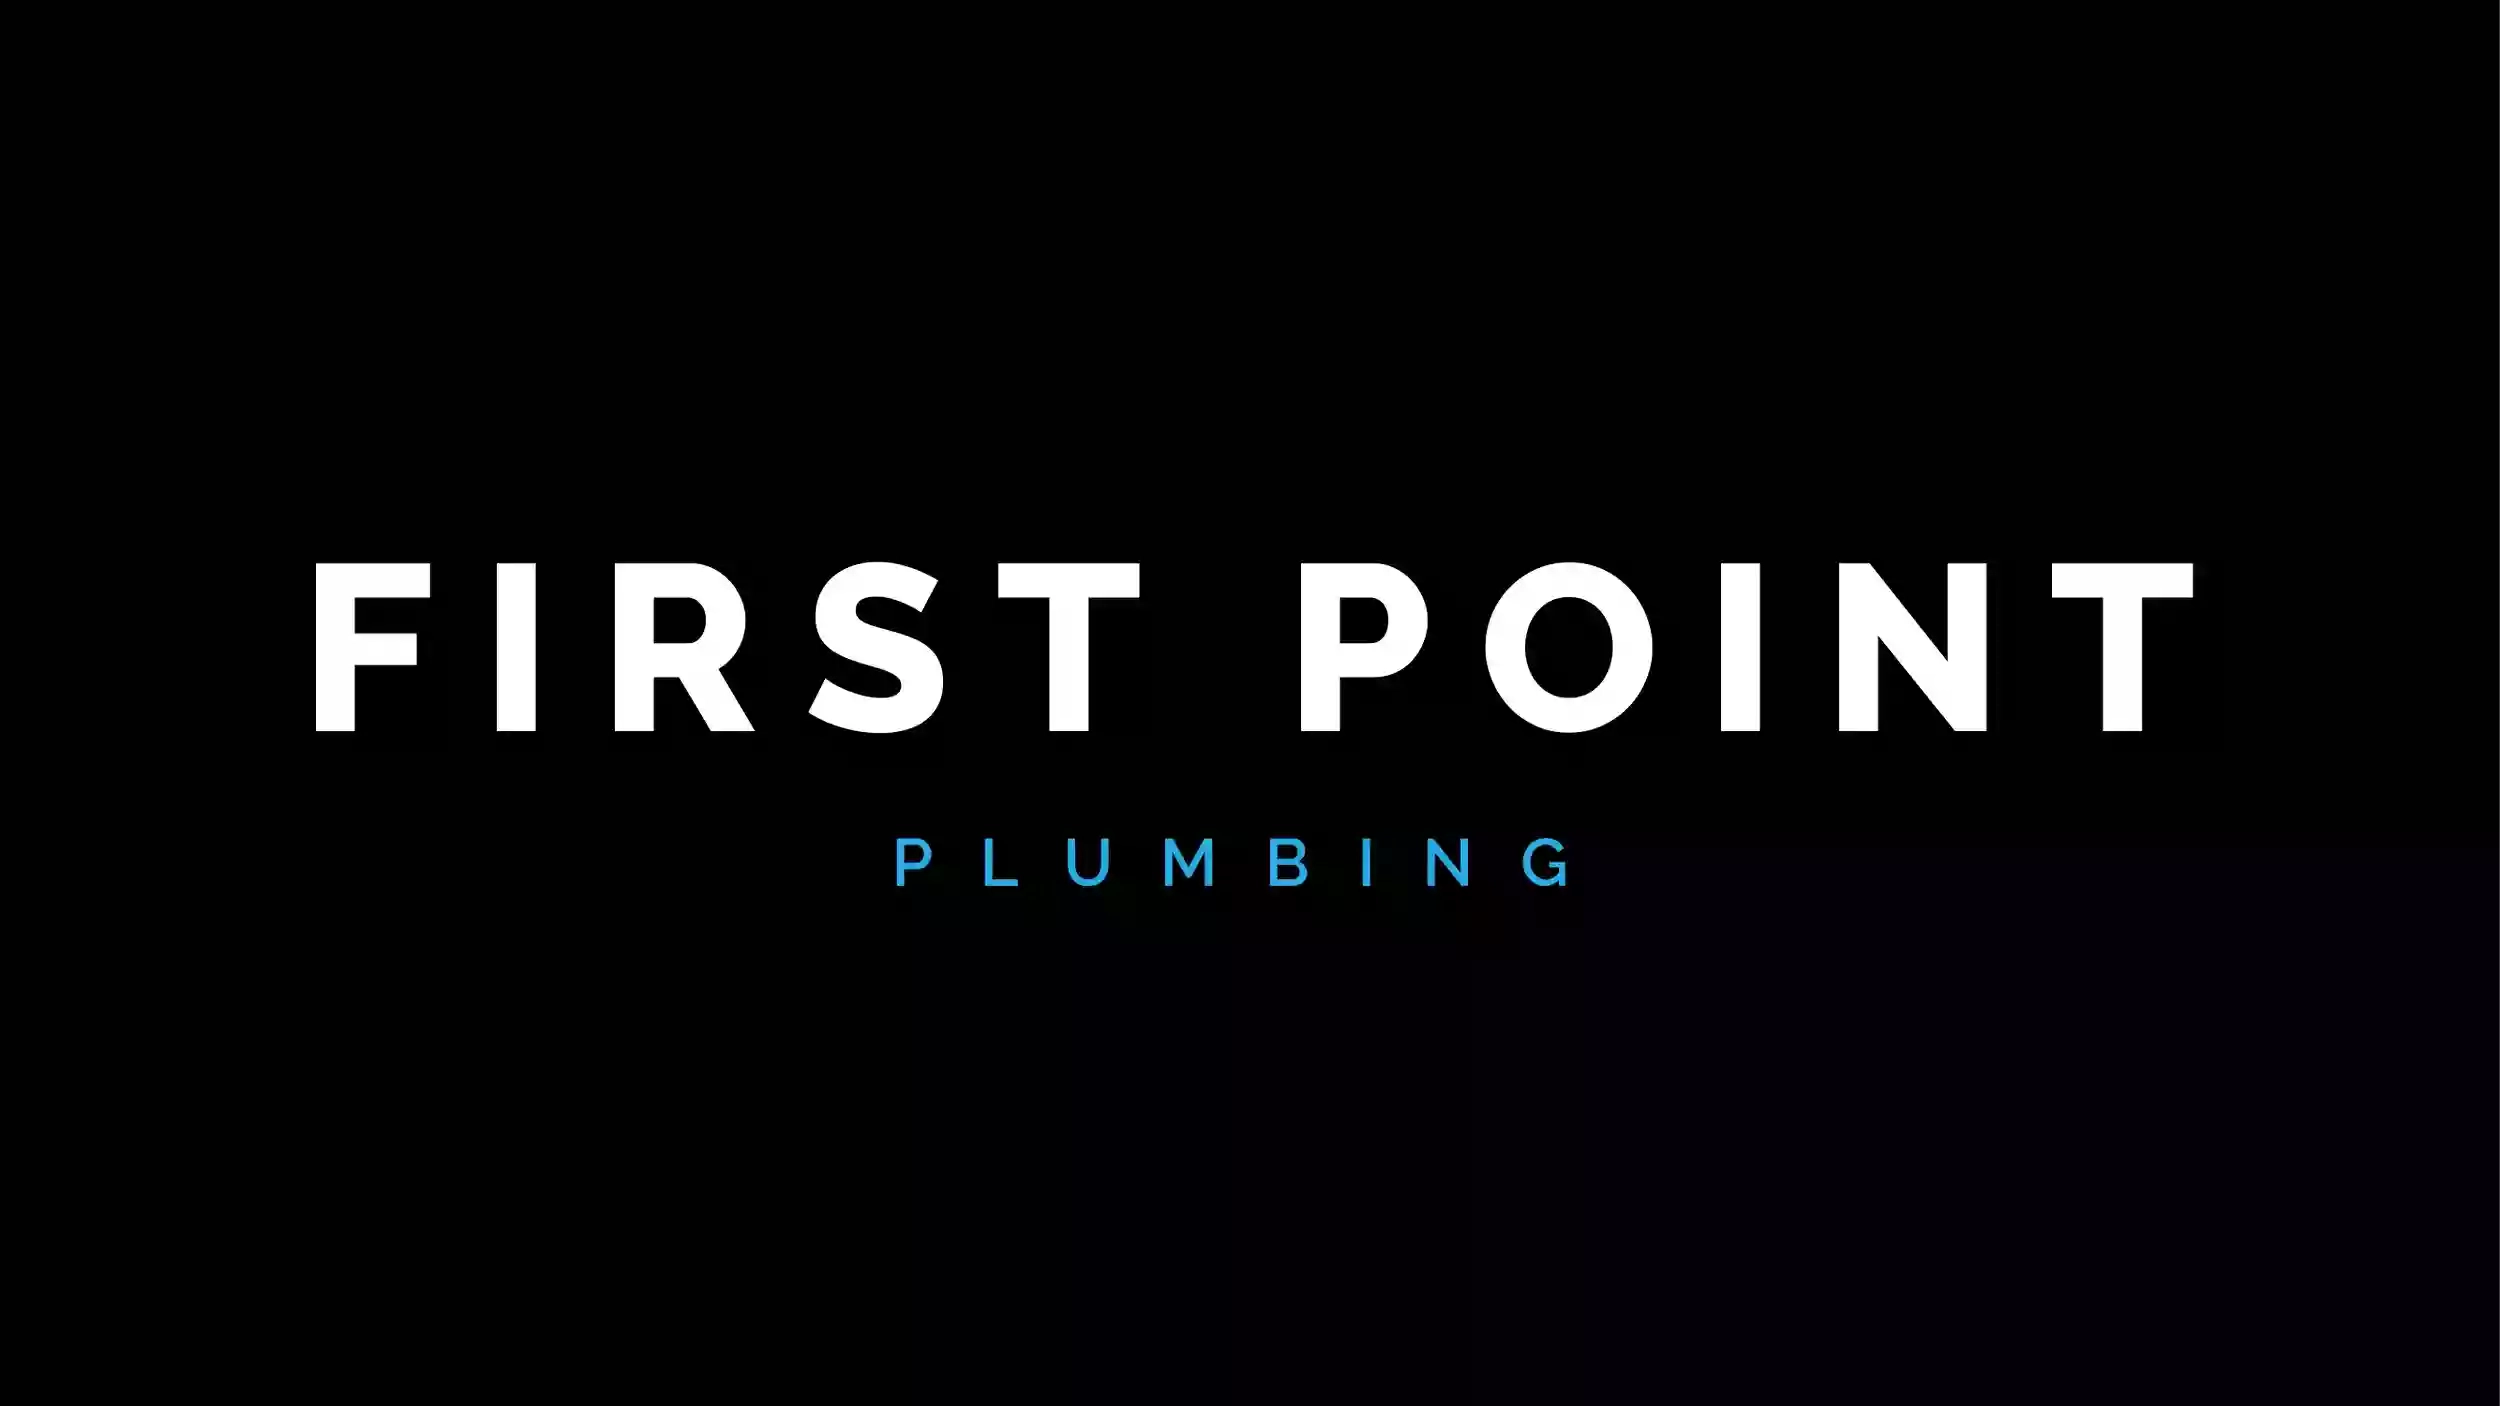 First Point Plumbing & Heating